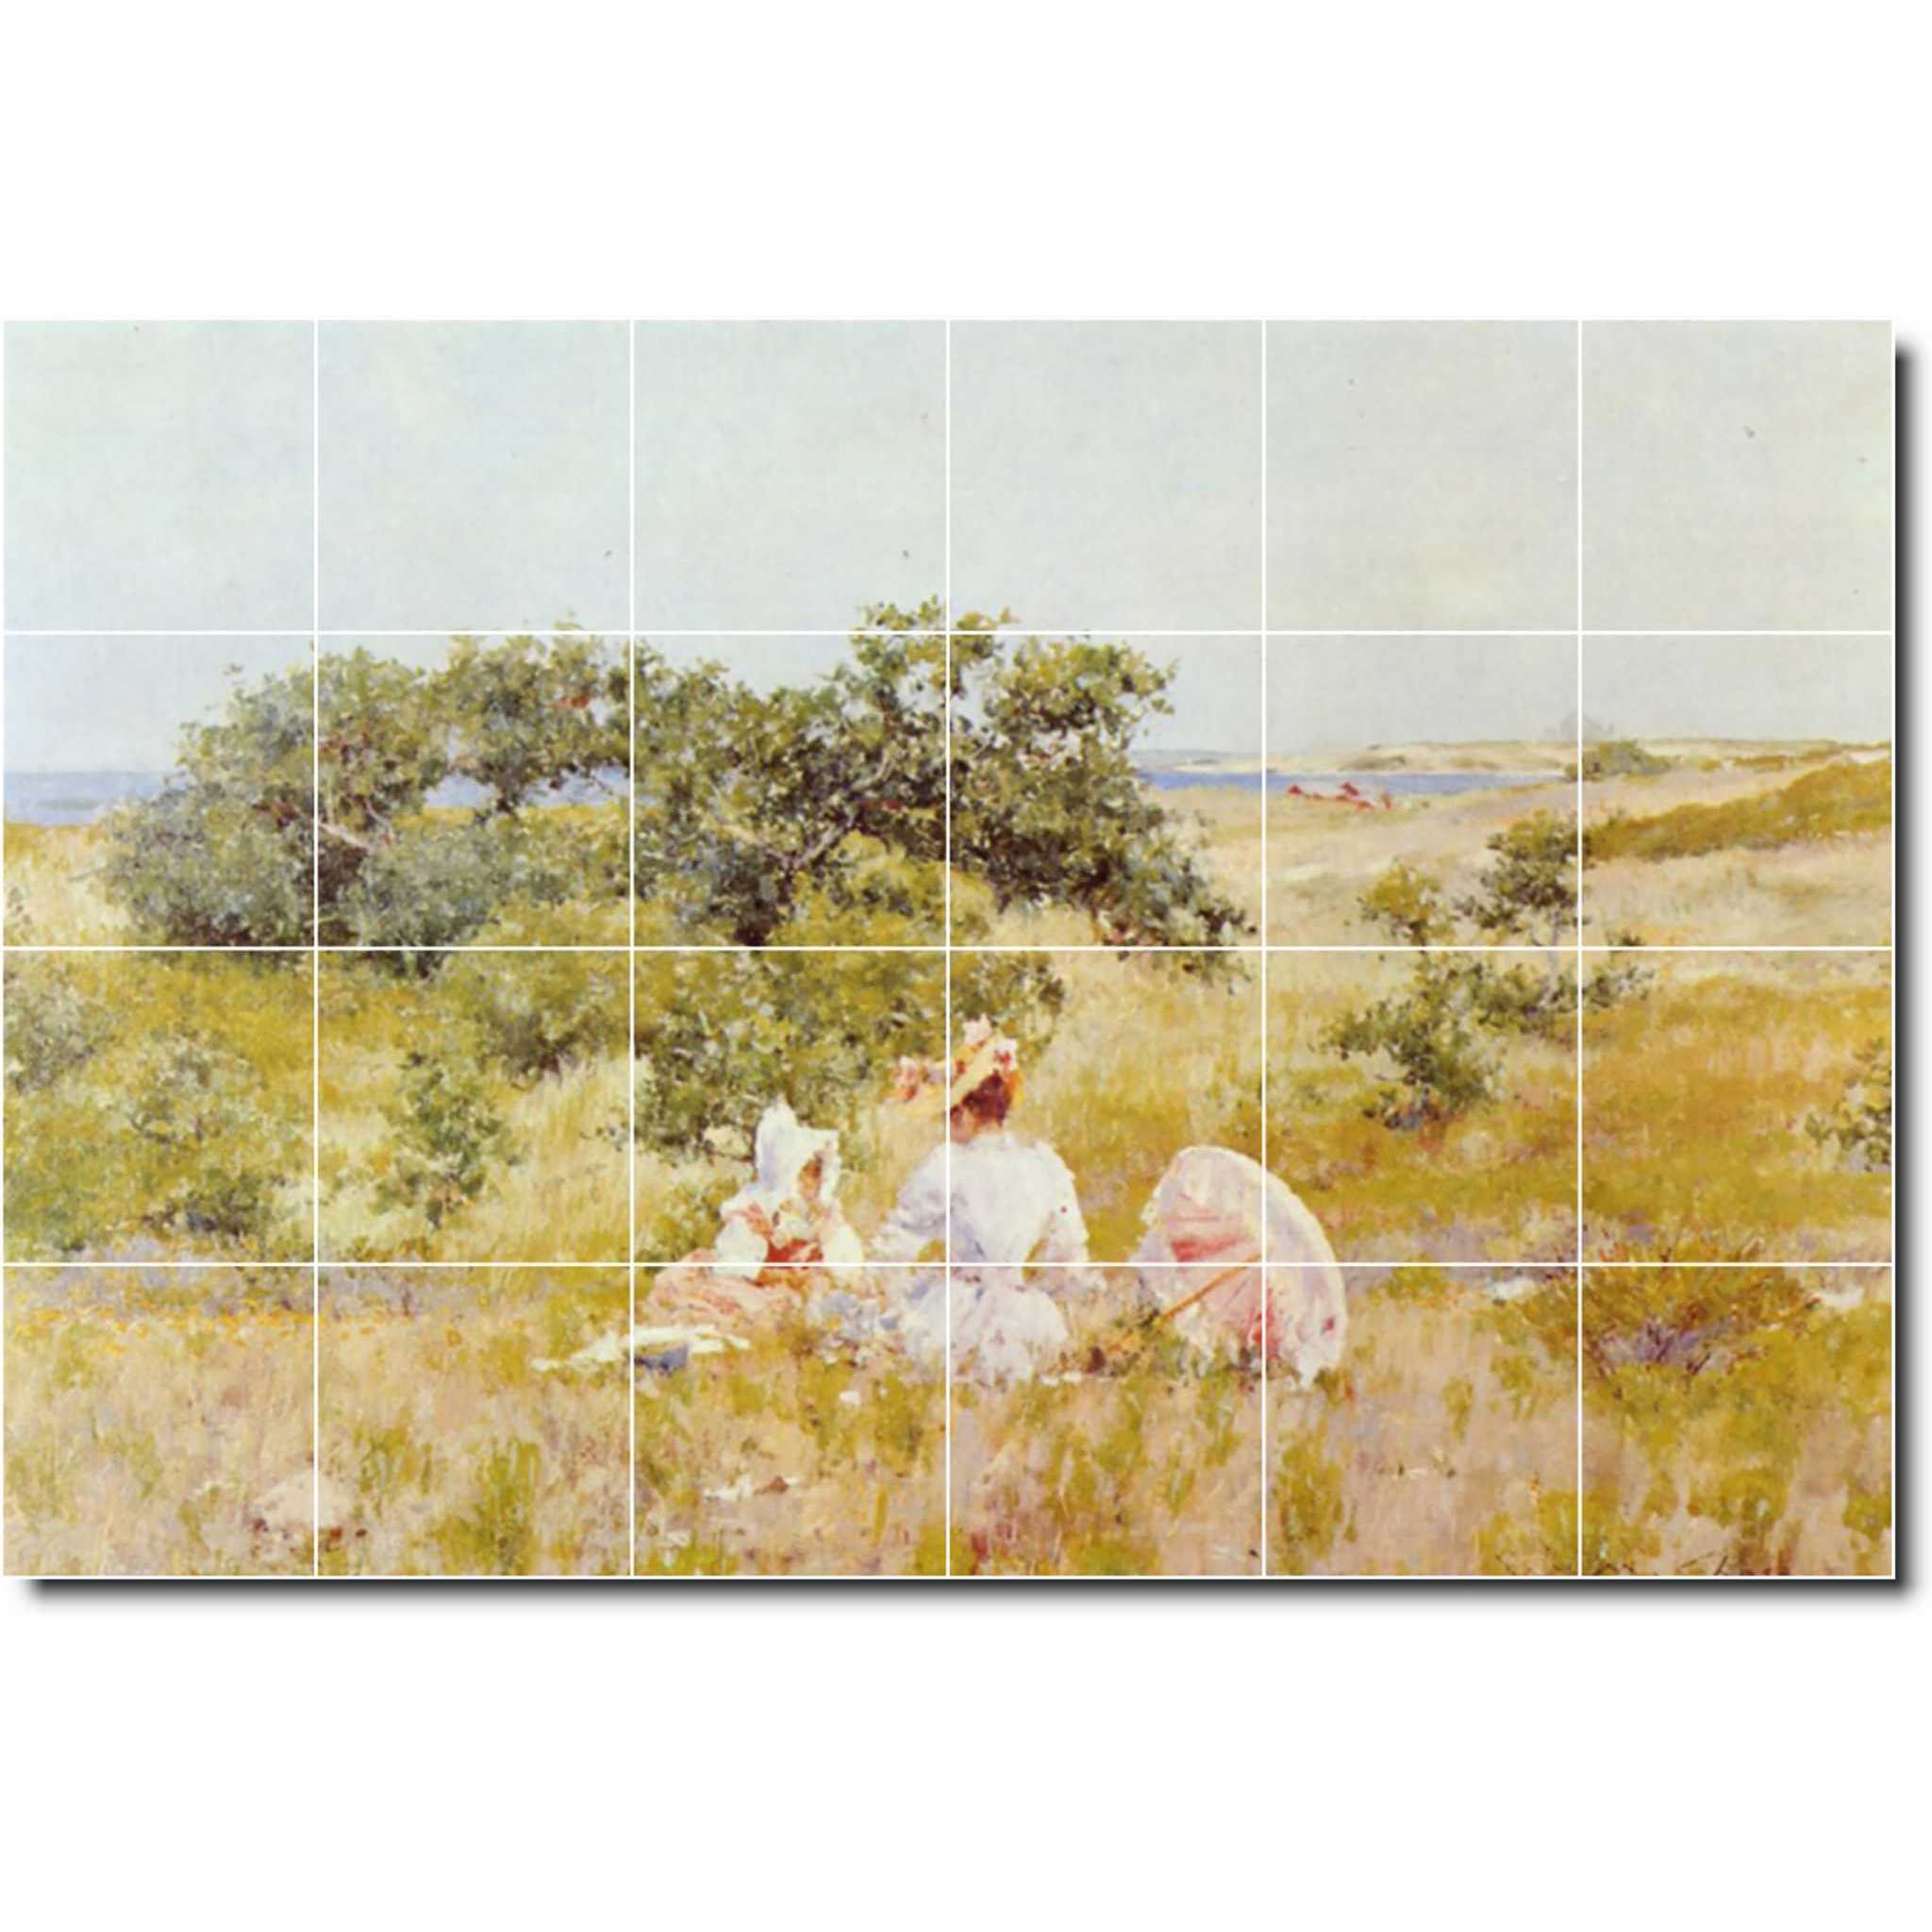 william chase country painting ceramic tile mural p01667